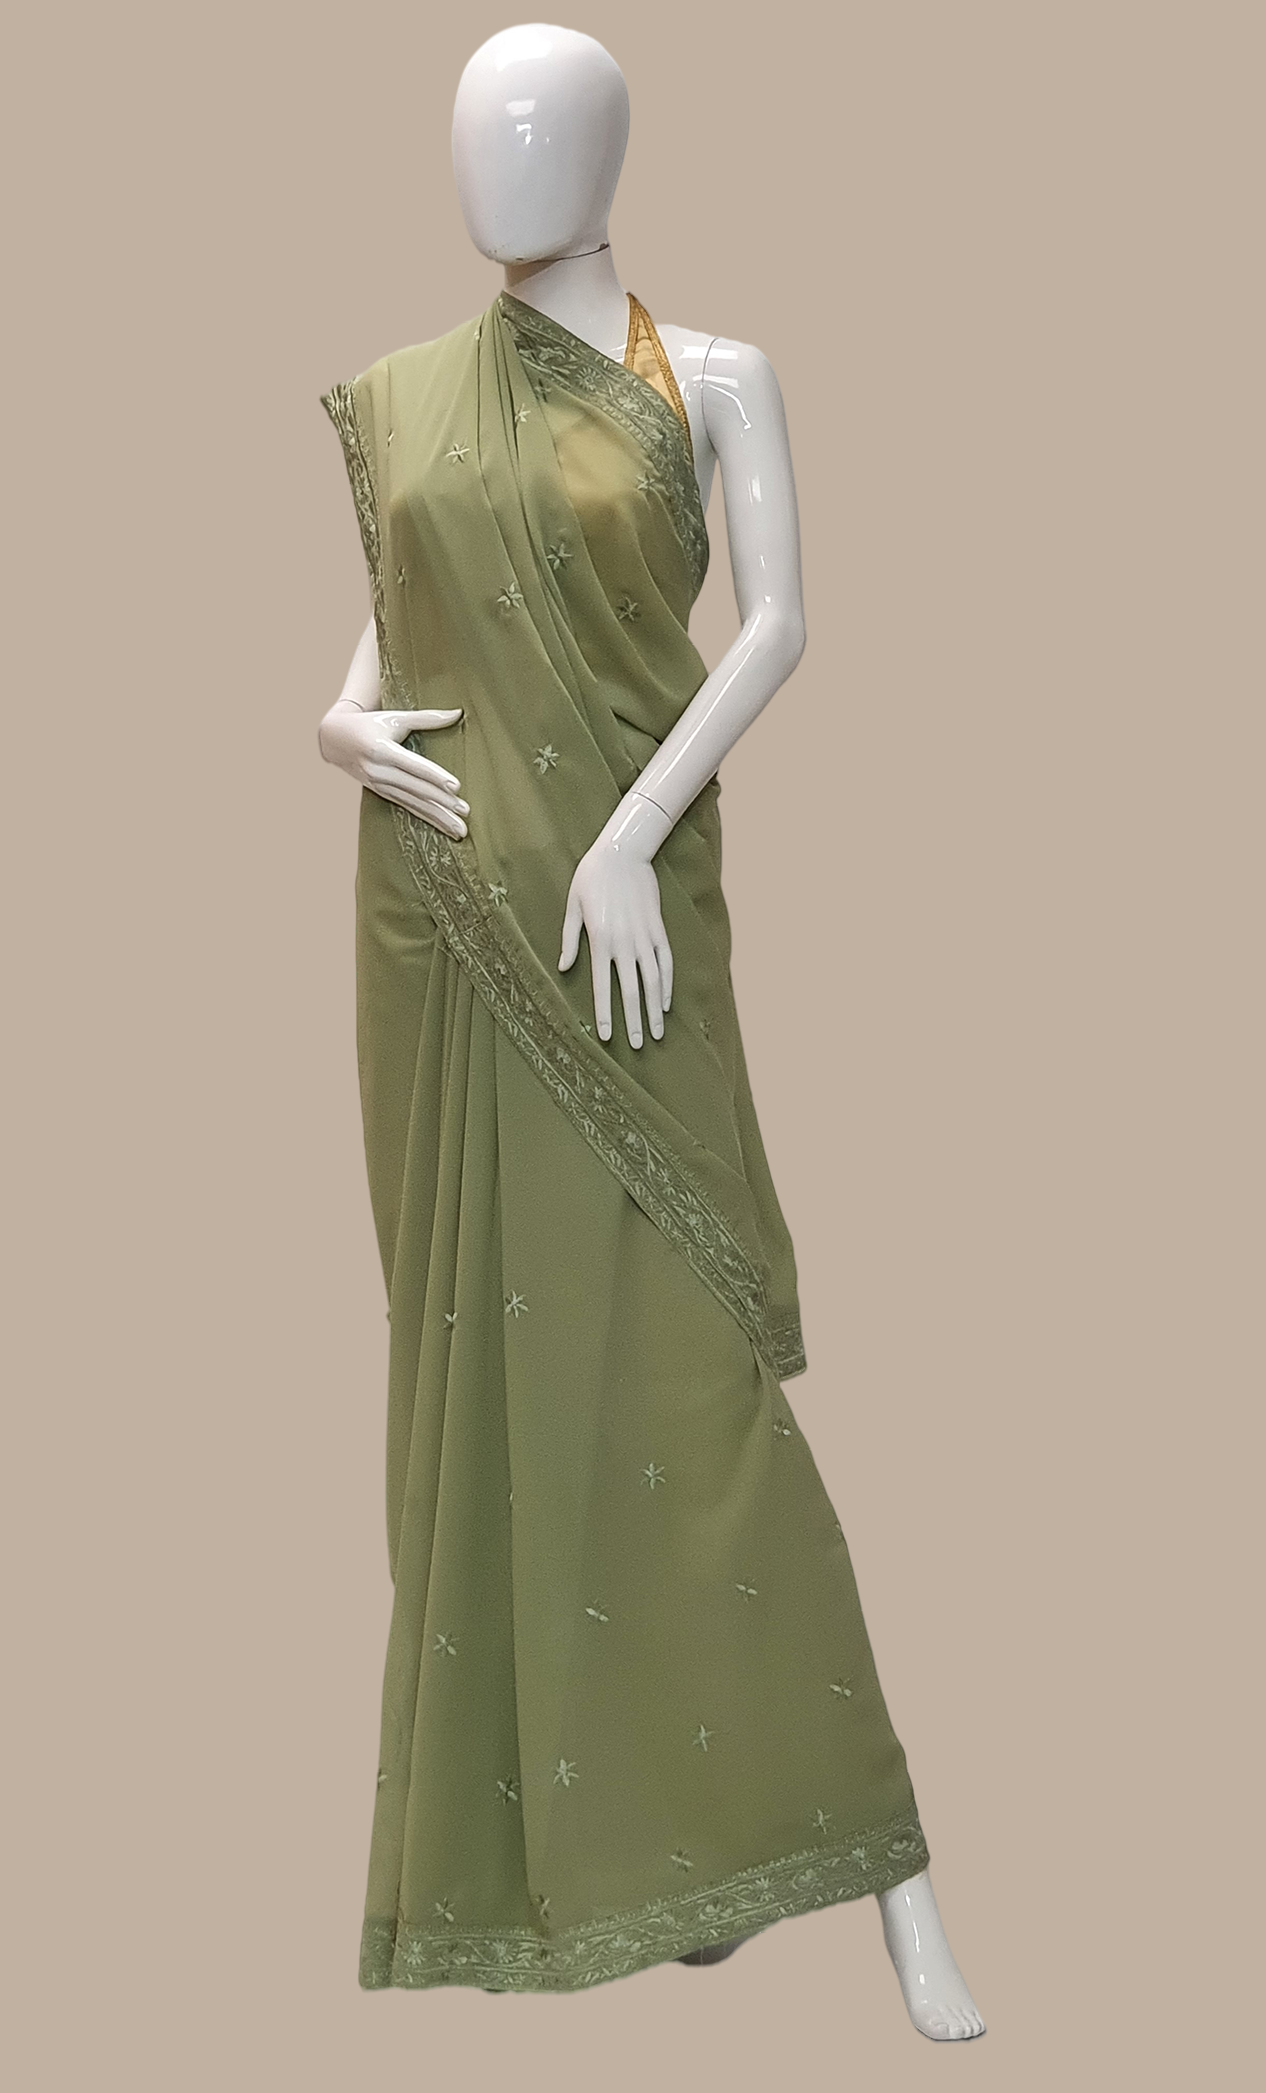 Olive Green Right Hand Embroidered Sari